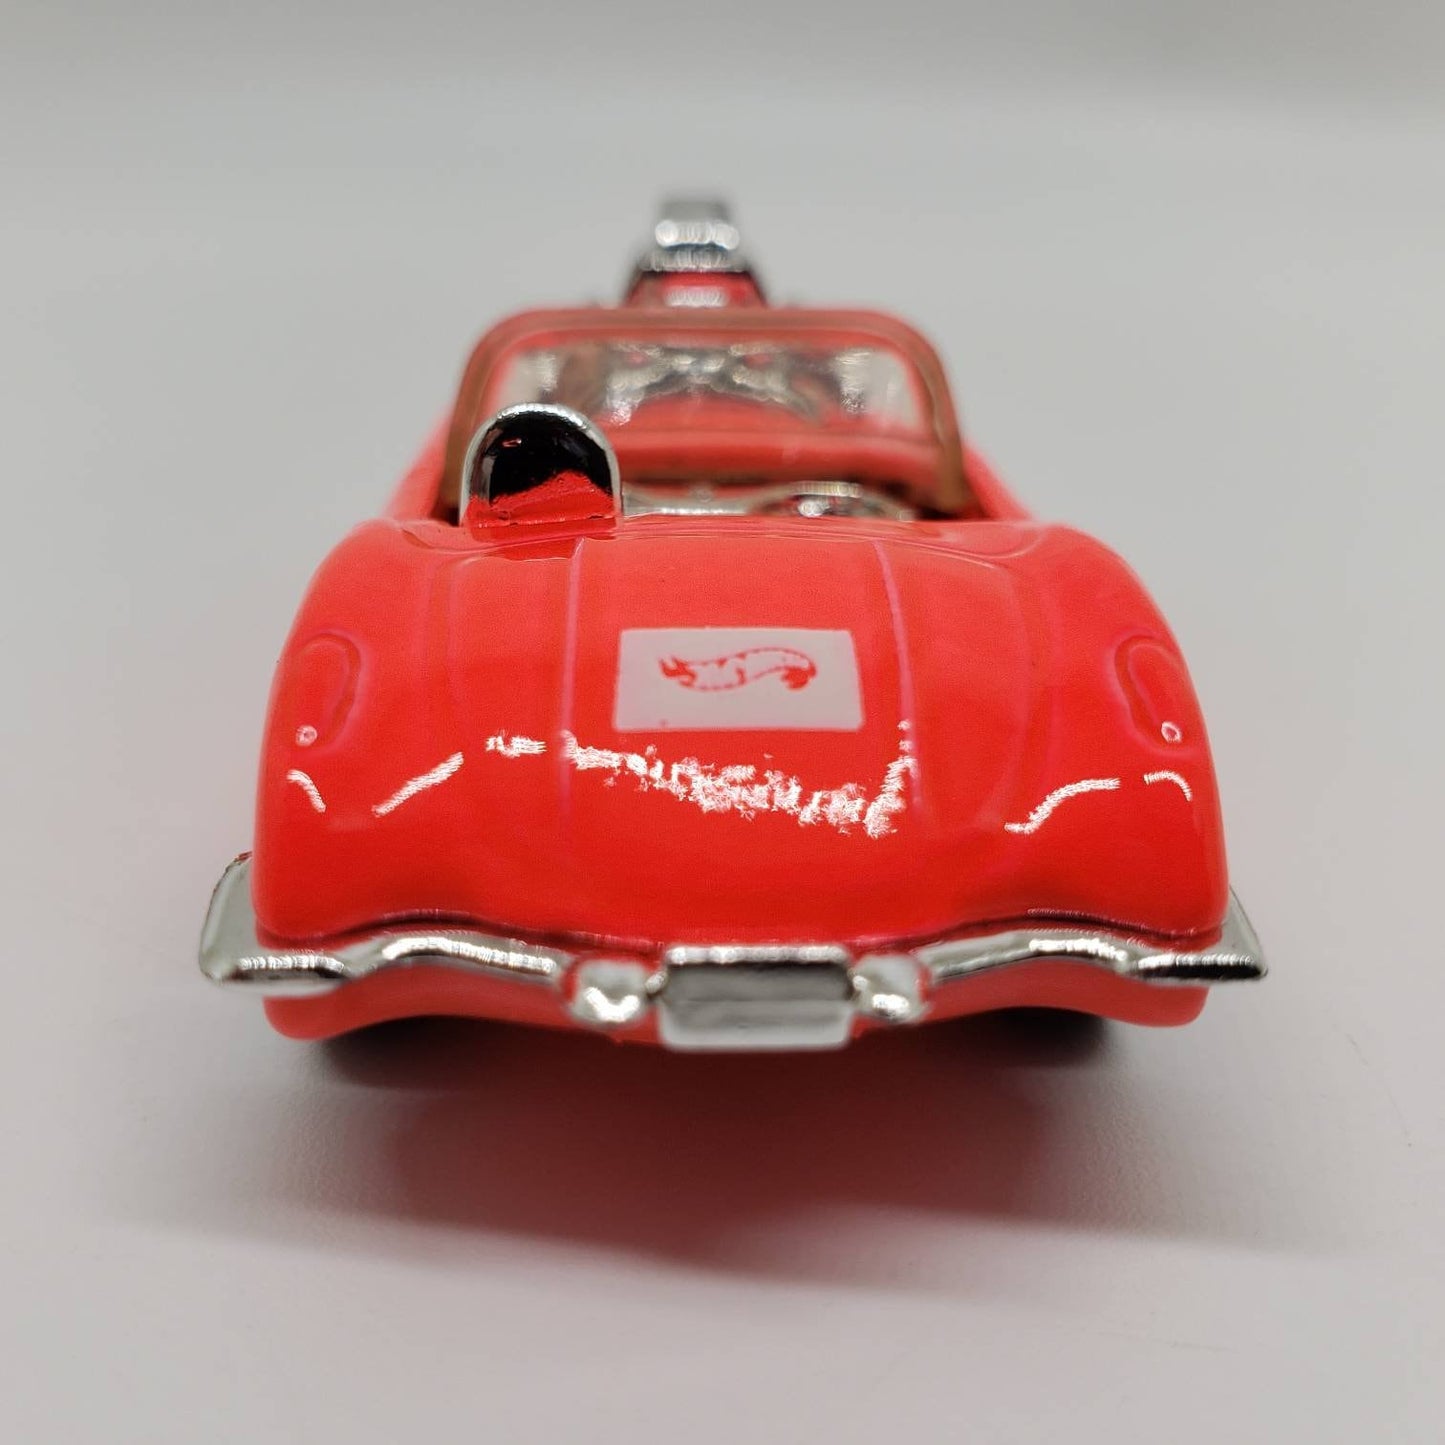 Hot Wheels '58 Corvette Coupe Hot Pink 1995 Models Series Perfect Birthday Gift Miniature Collectable Scale Model Toy Car